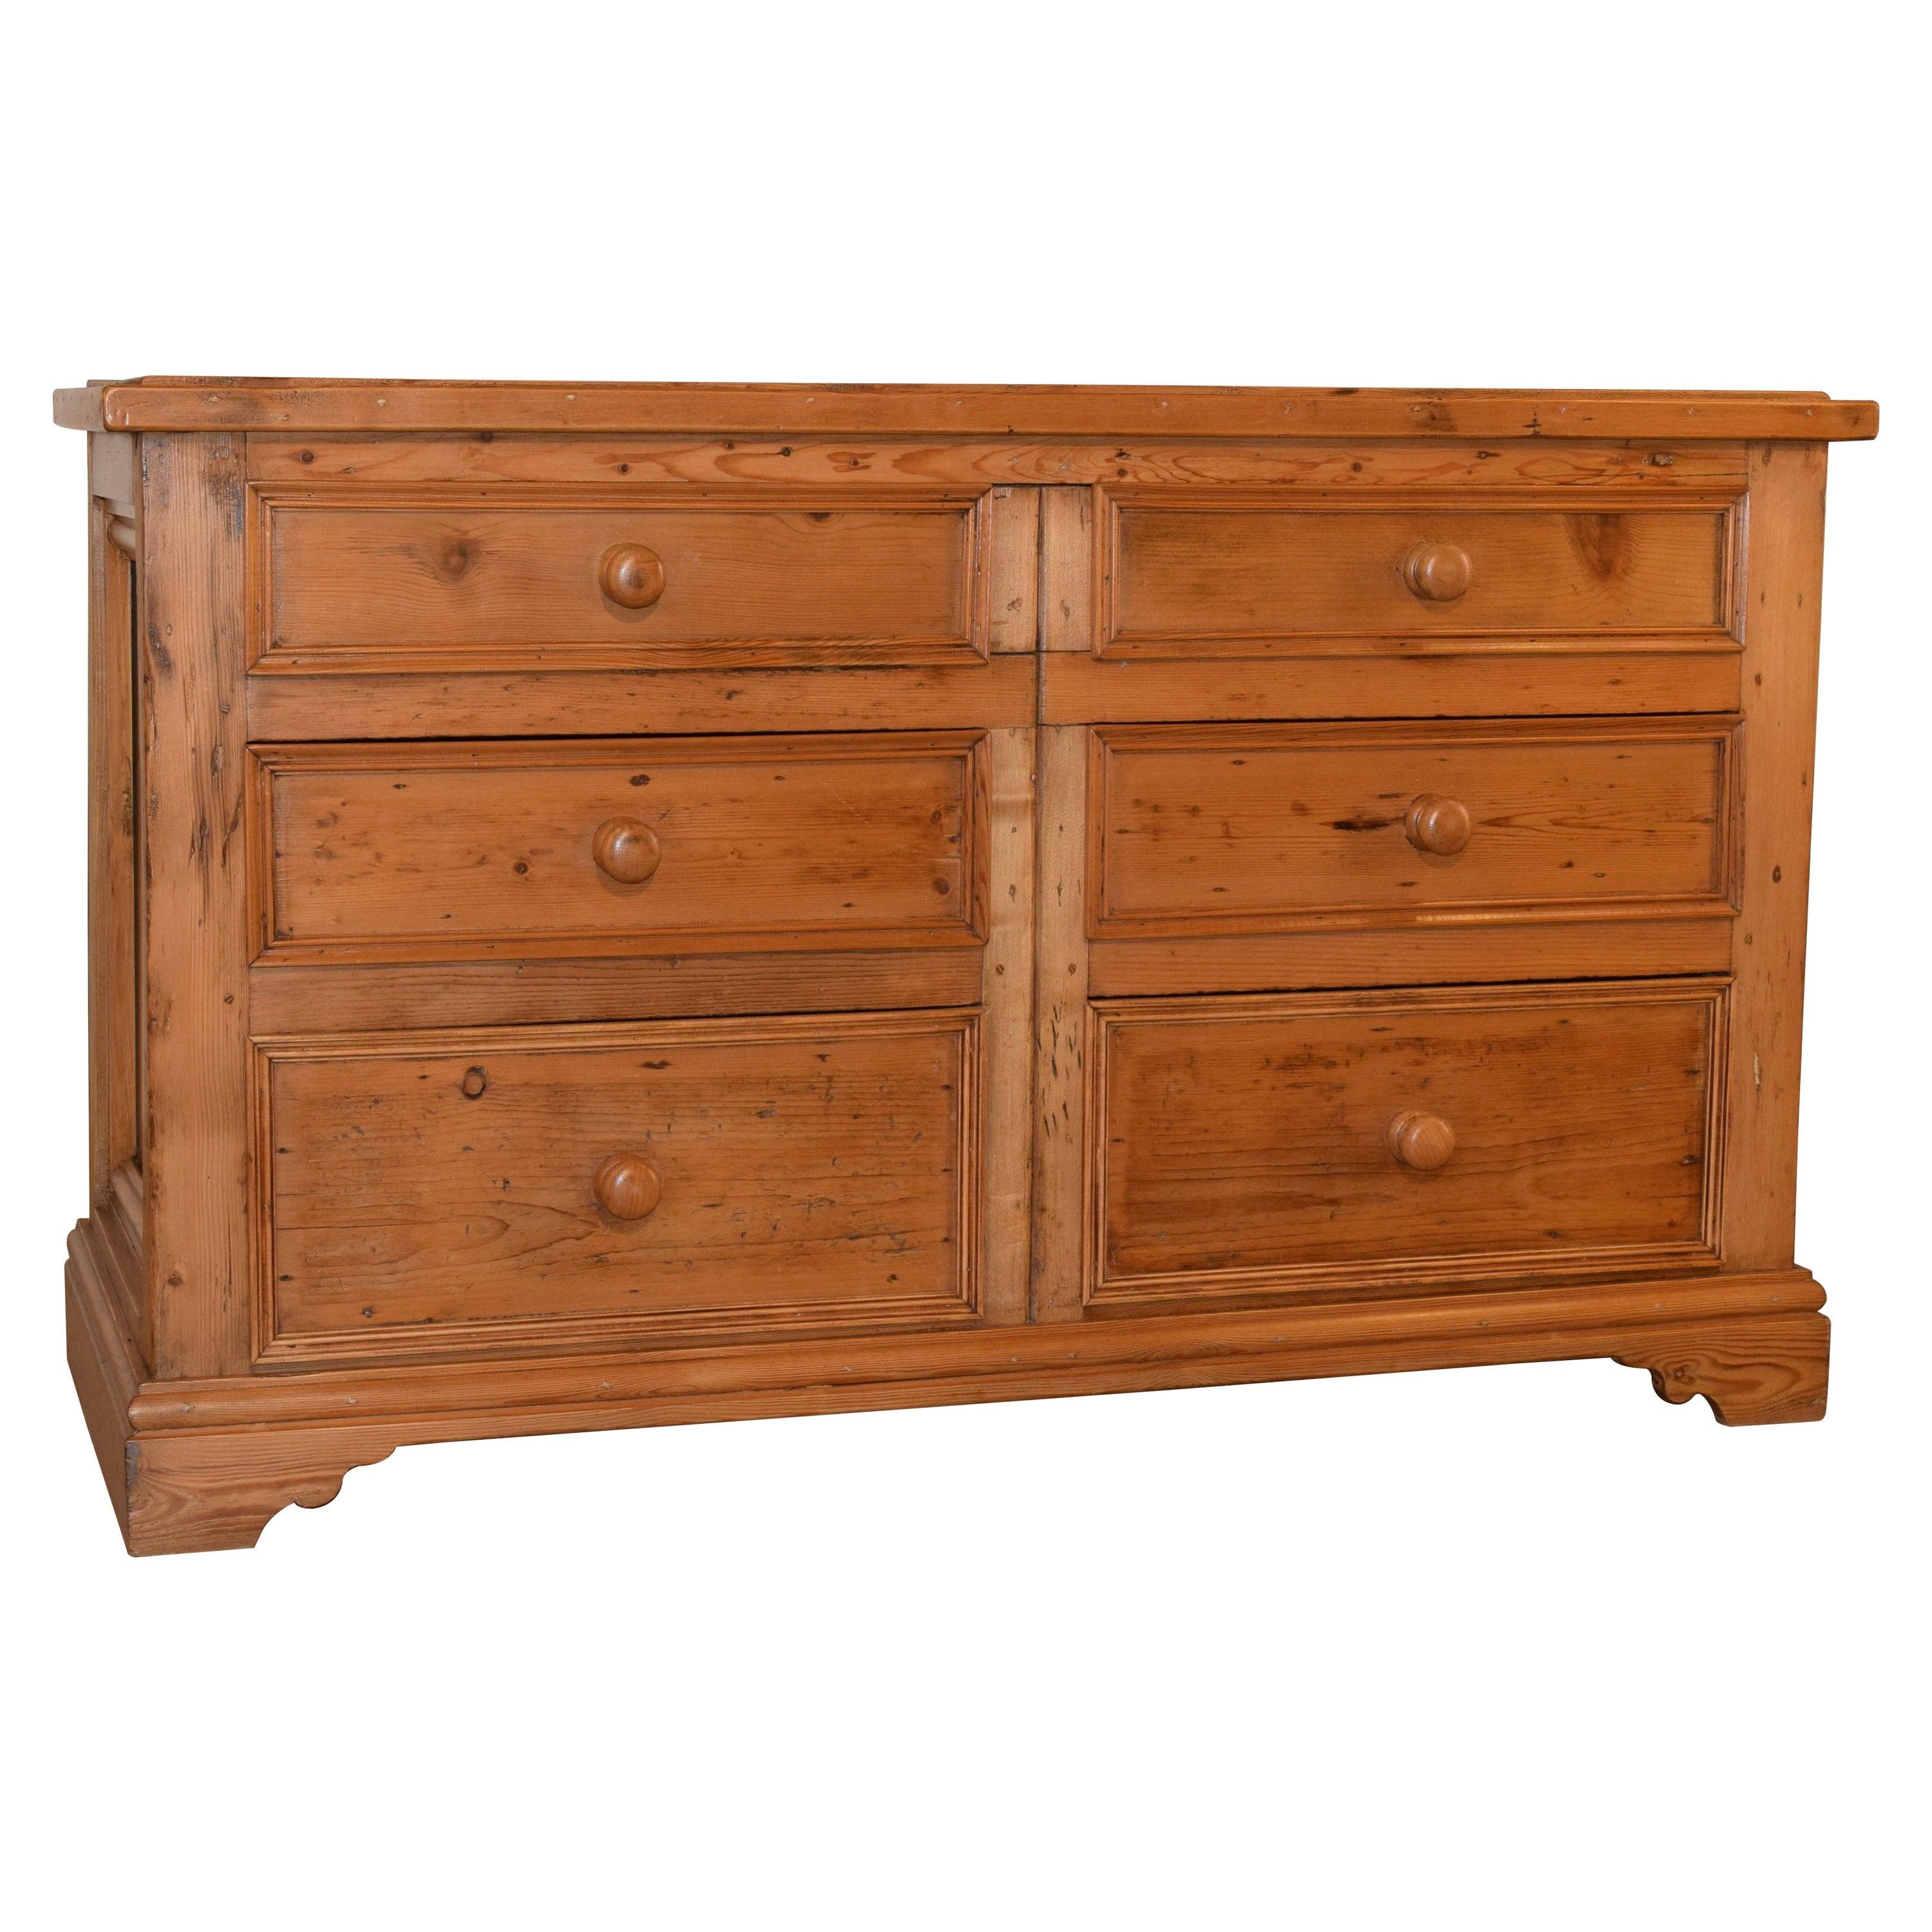 19th Century English Wide Pine Chest of Drawers For Sale